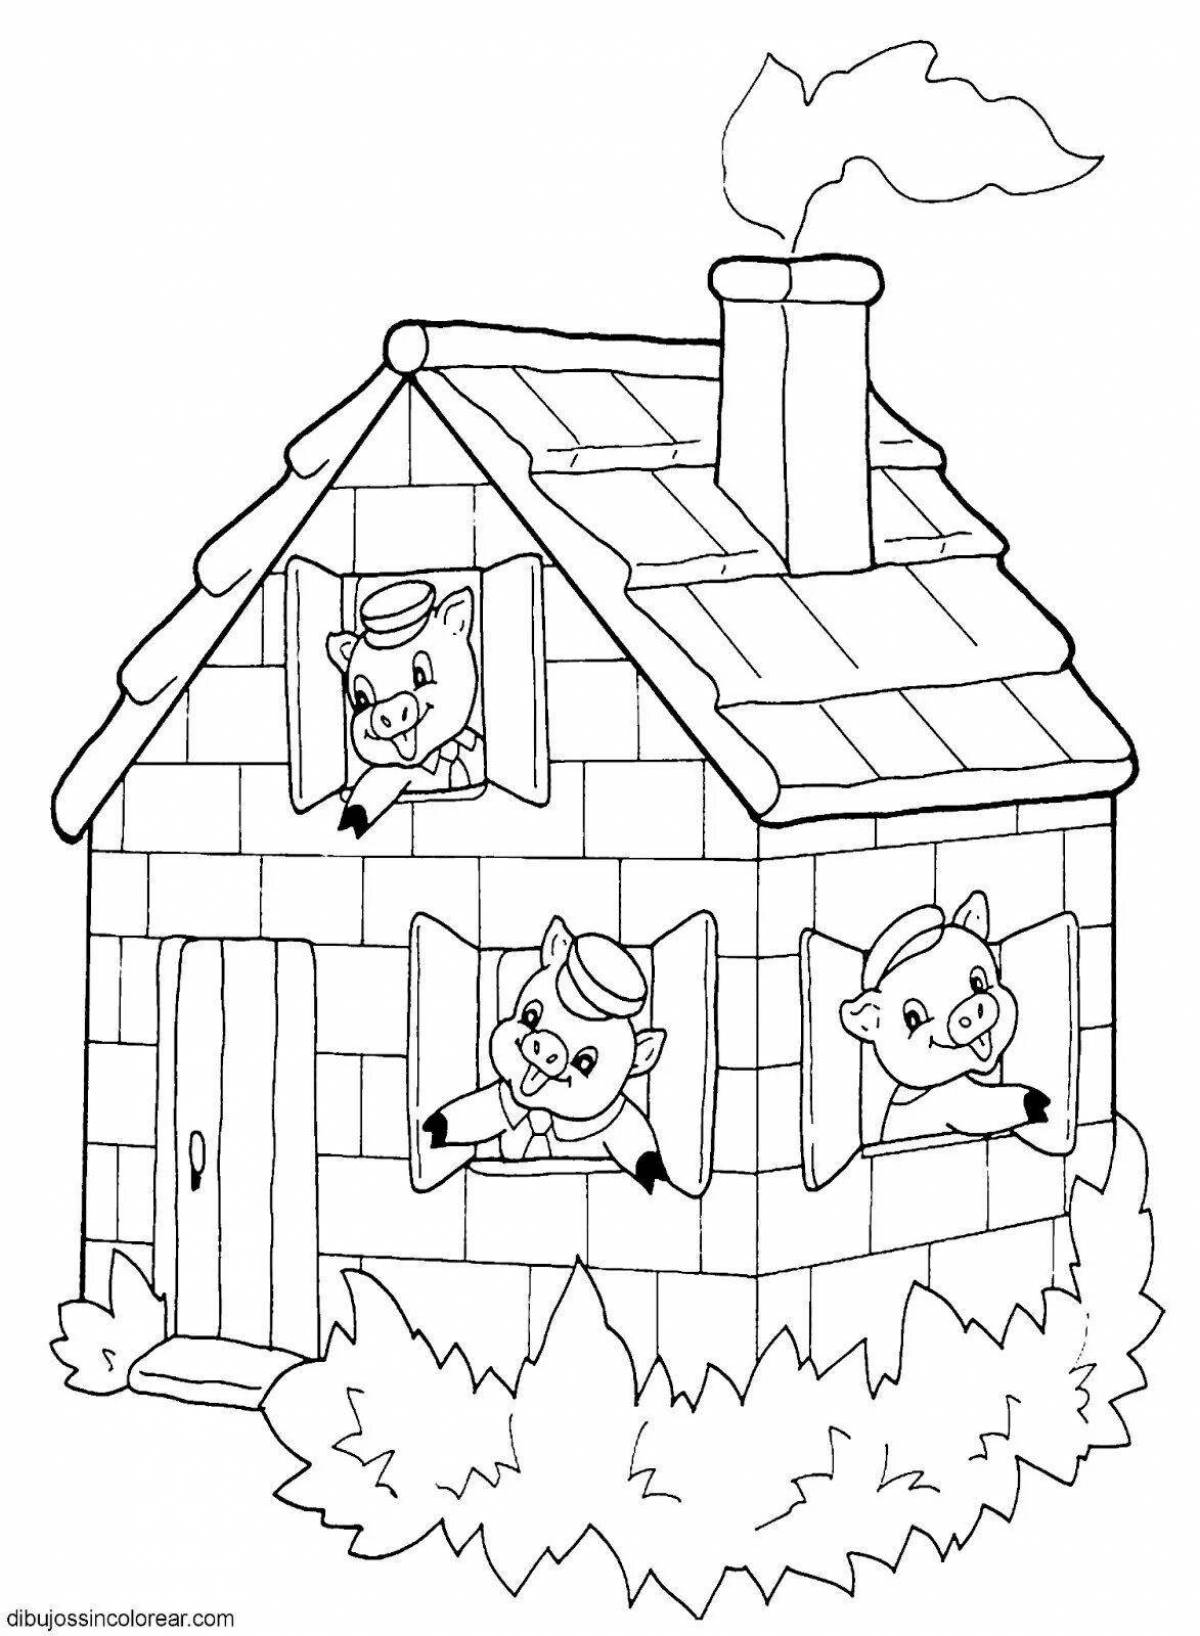 Adorable cat house coloring book for 4-5 year olds